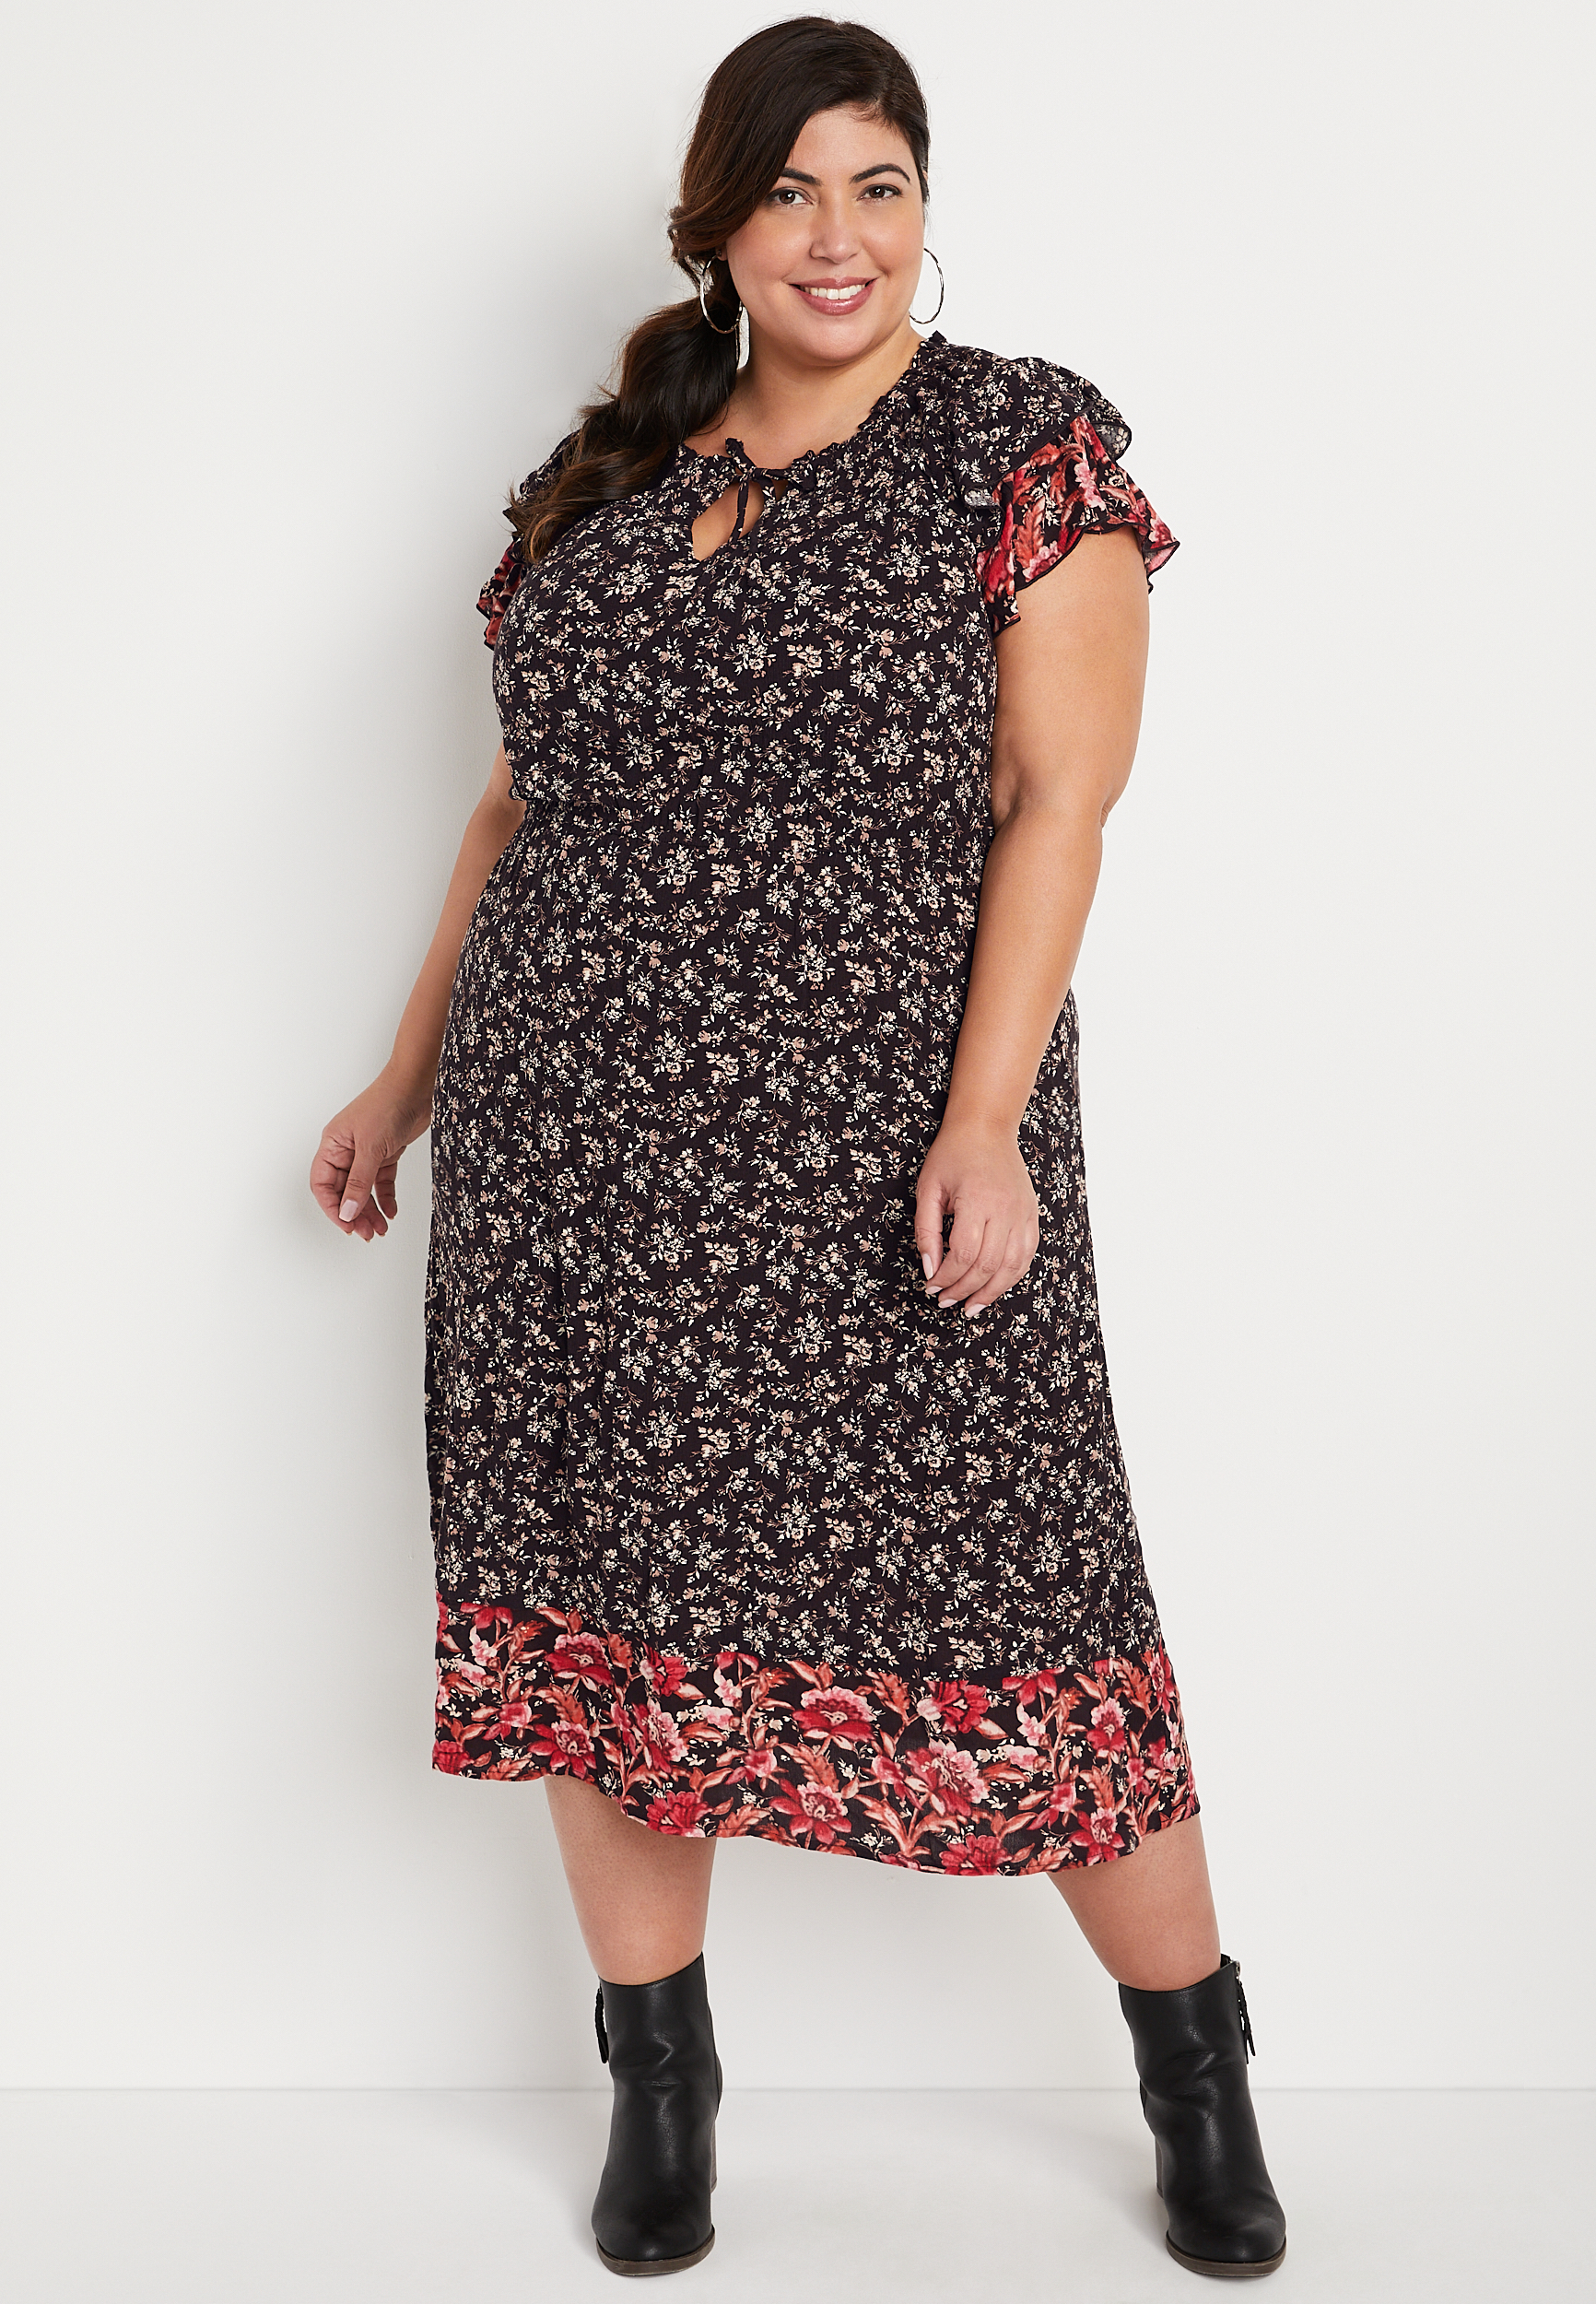 dommer harpun indhente Cute Plus Size Summer Casual Work Outfits | maurices